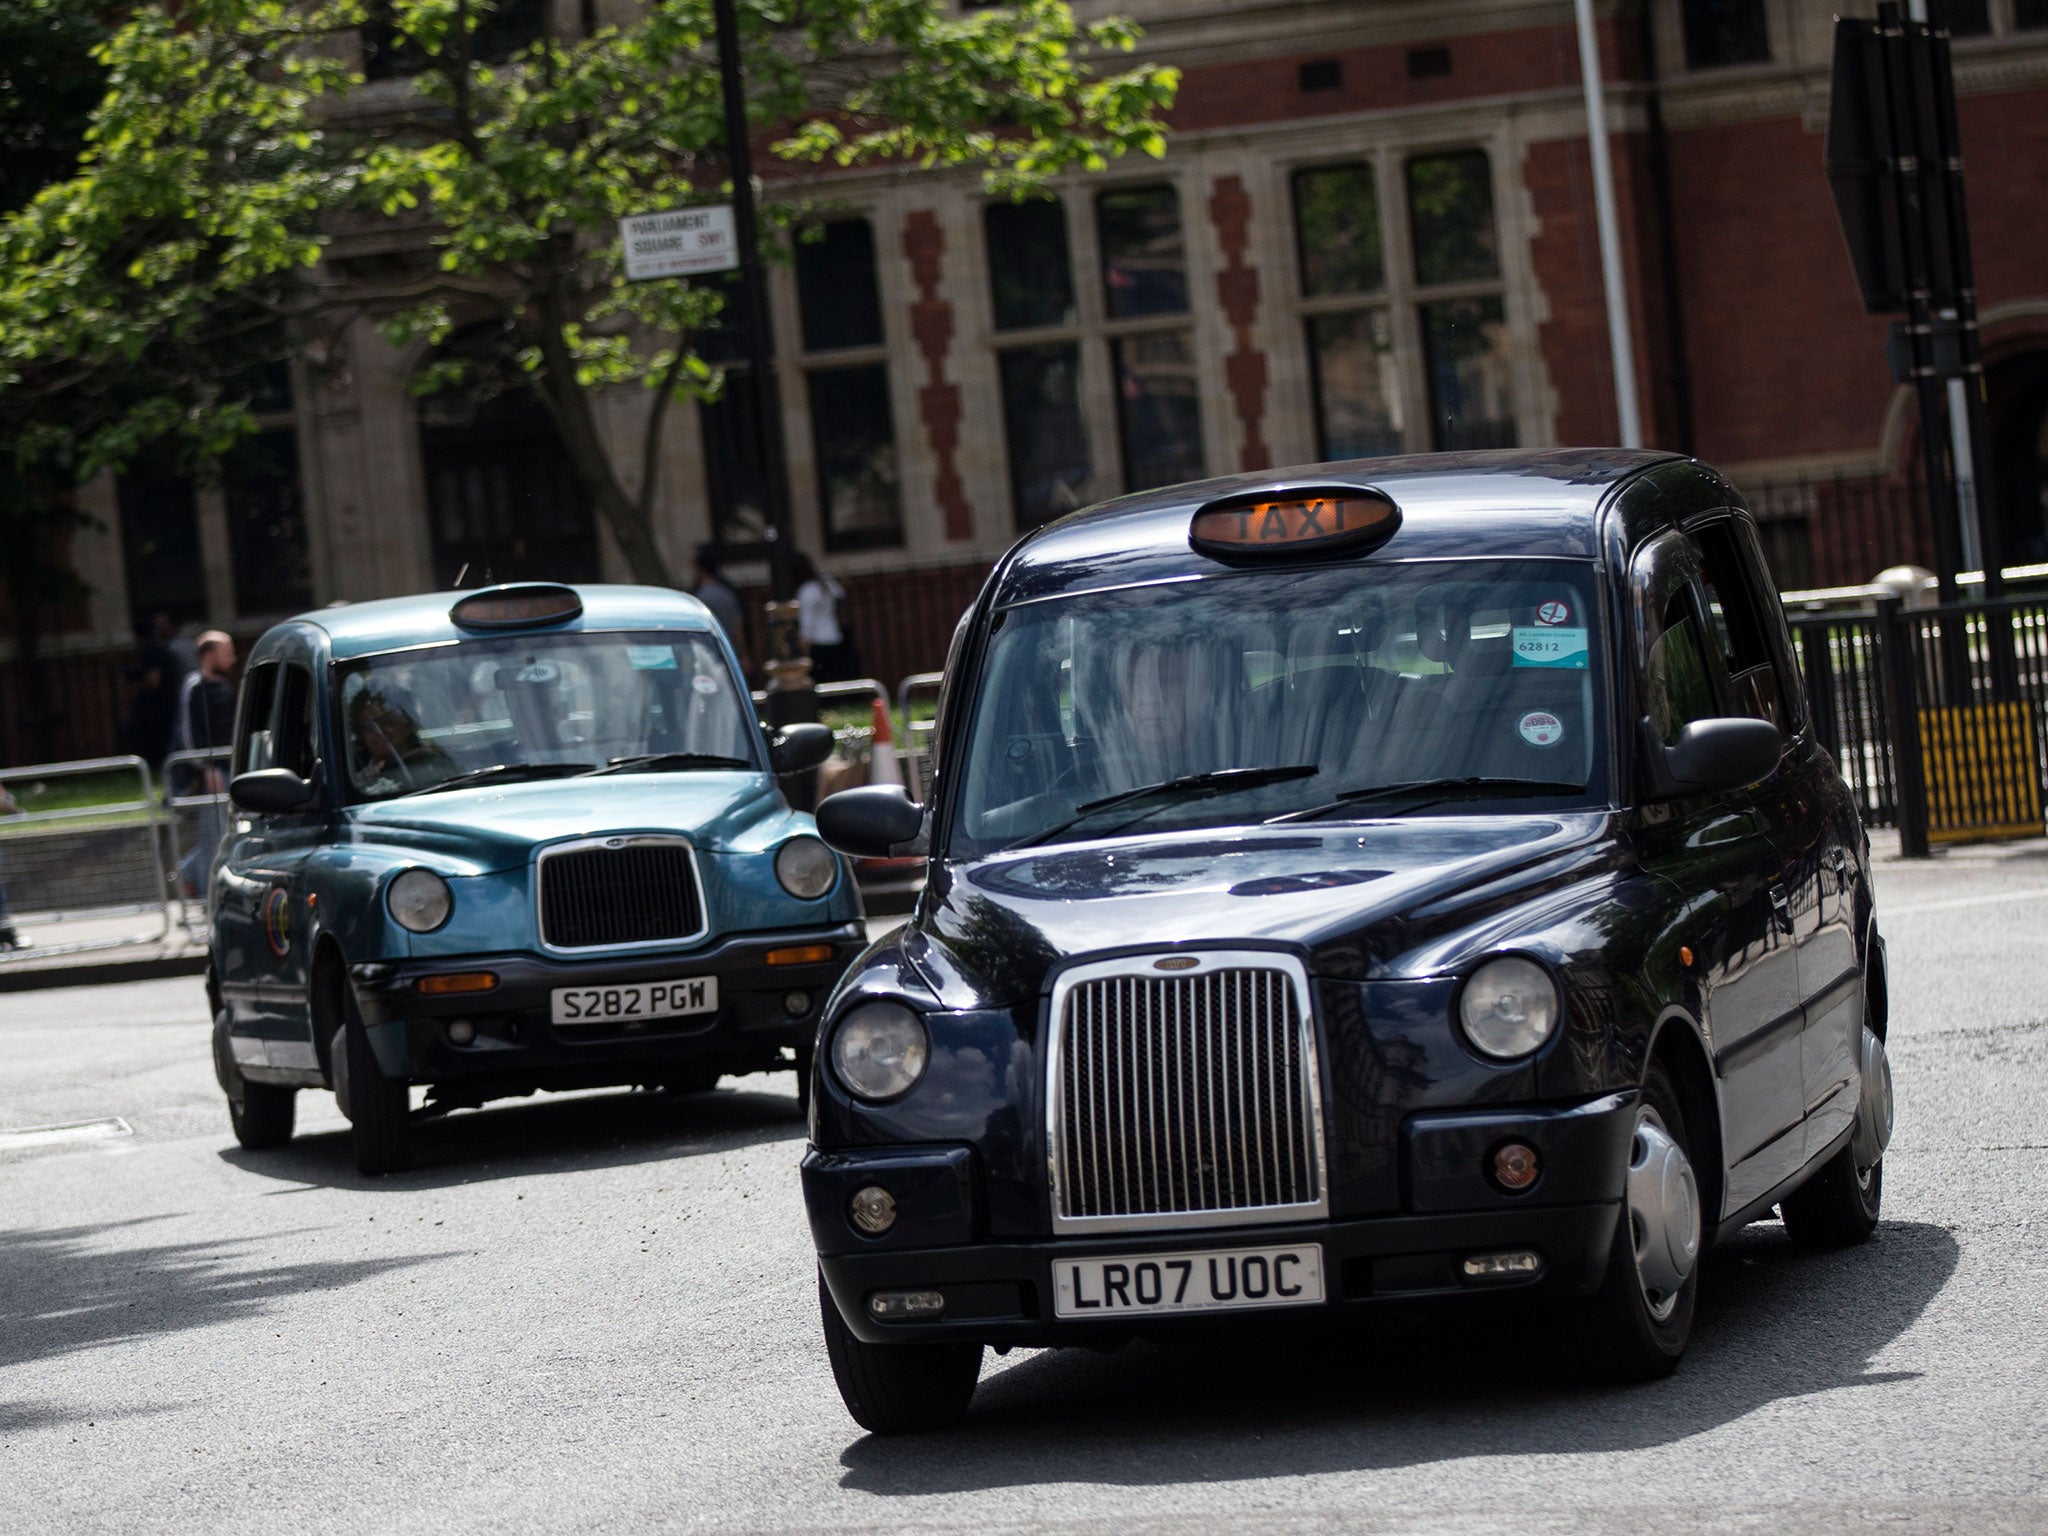 Black cab drivers will receive a discount on a new electric taxi